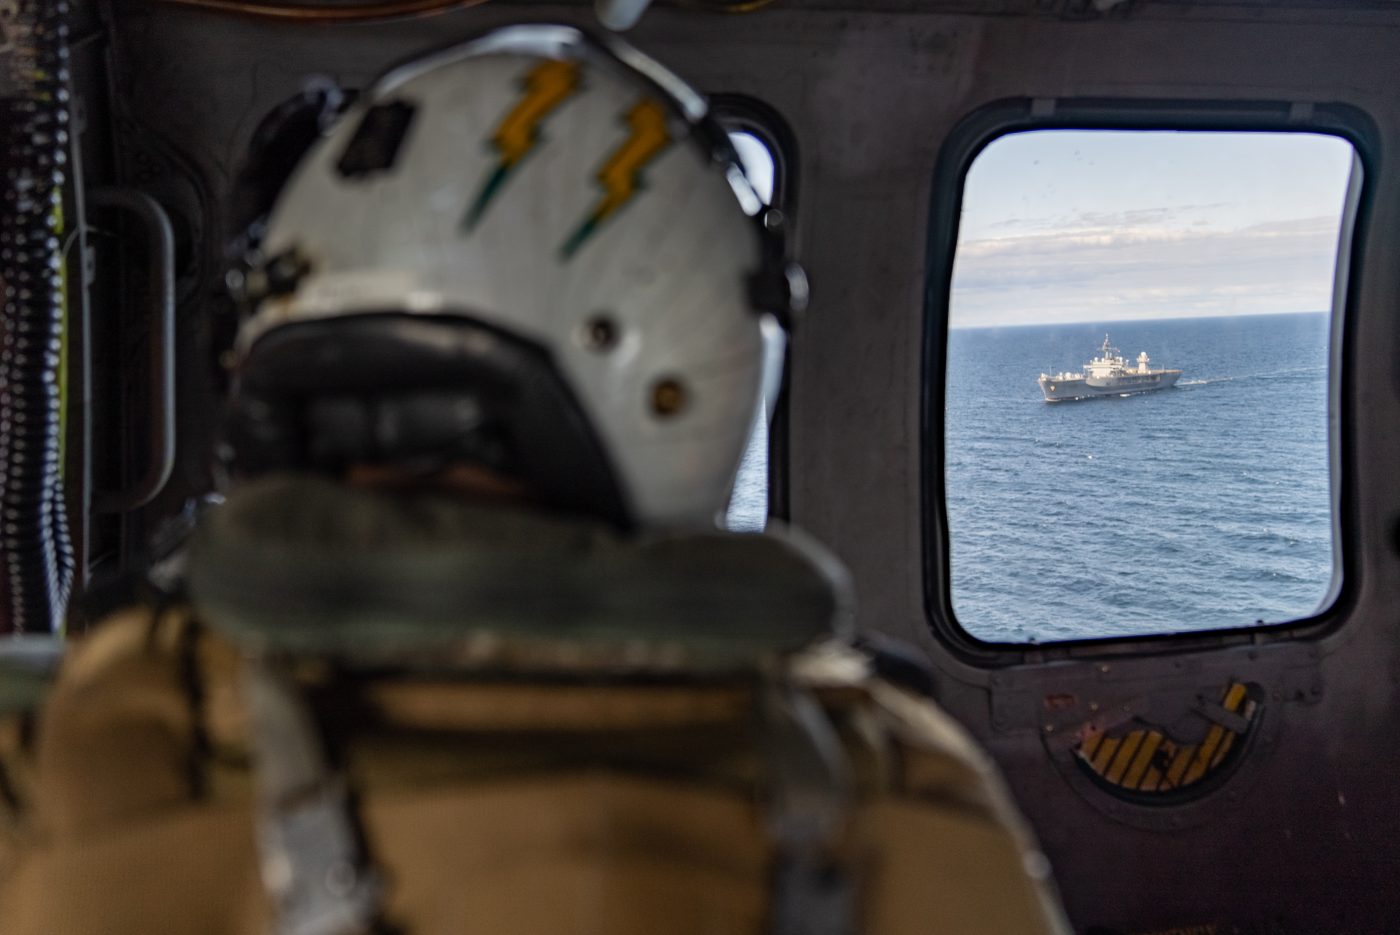 Photo: A US naval aircrewman looks out to USS Mount Whitney while airborne. Credit: NATO via Flickr https://flic.kr/p/2oGV12h